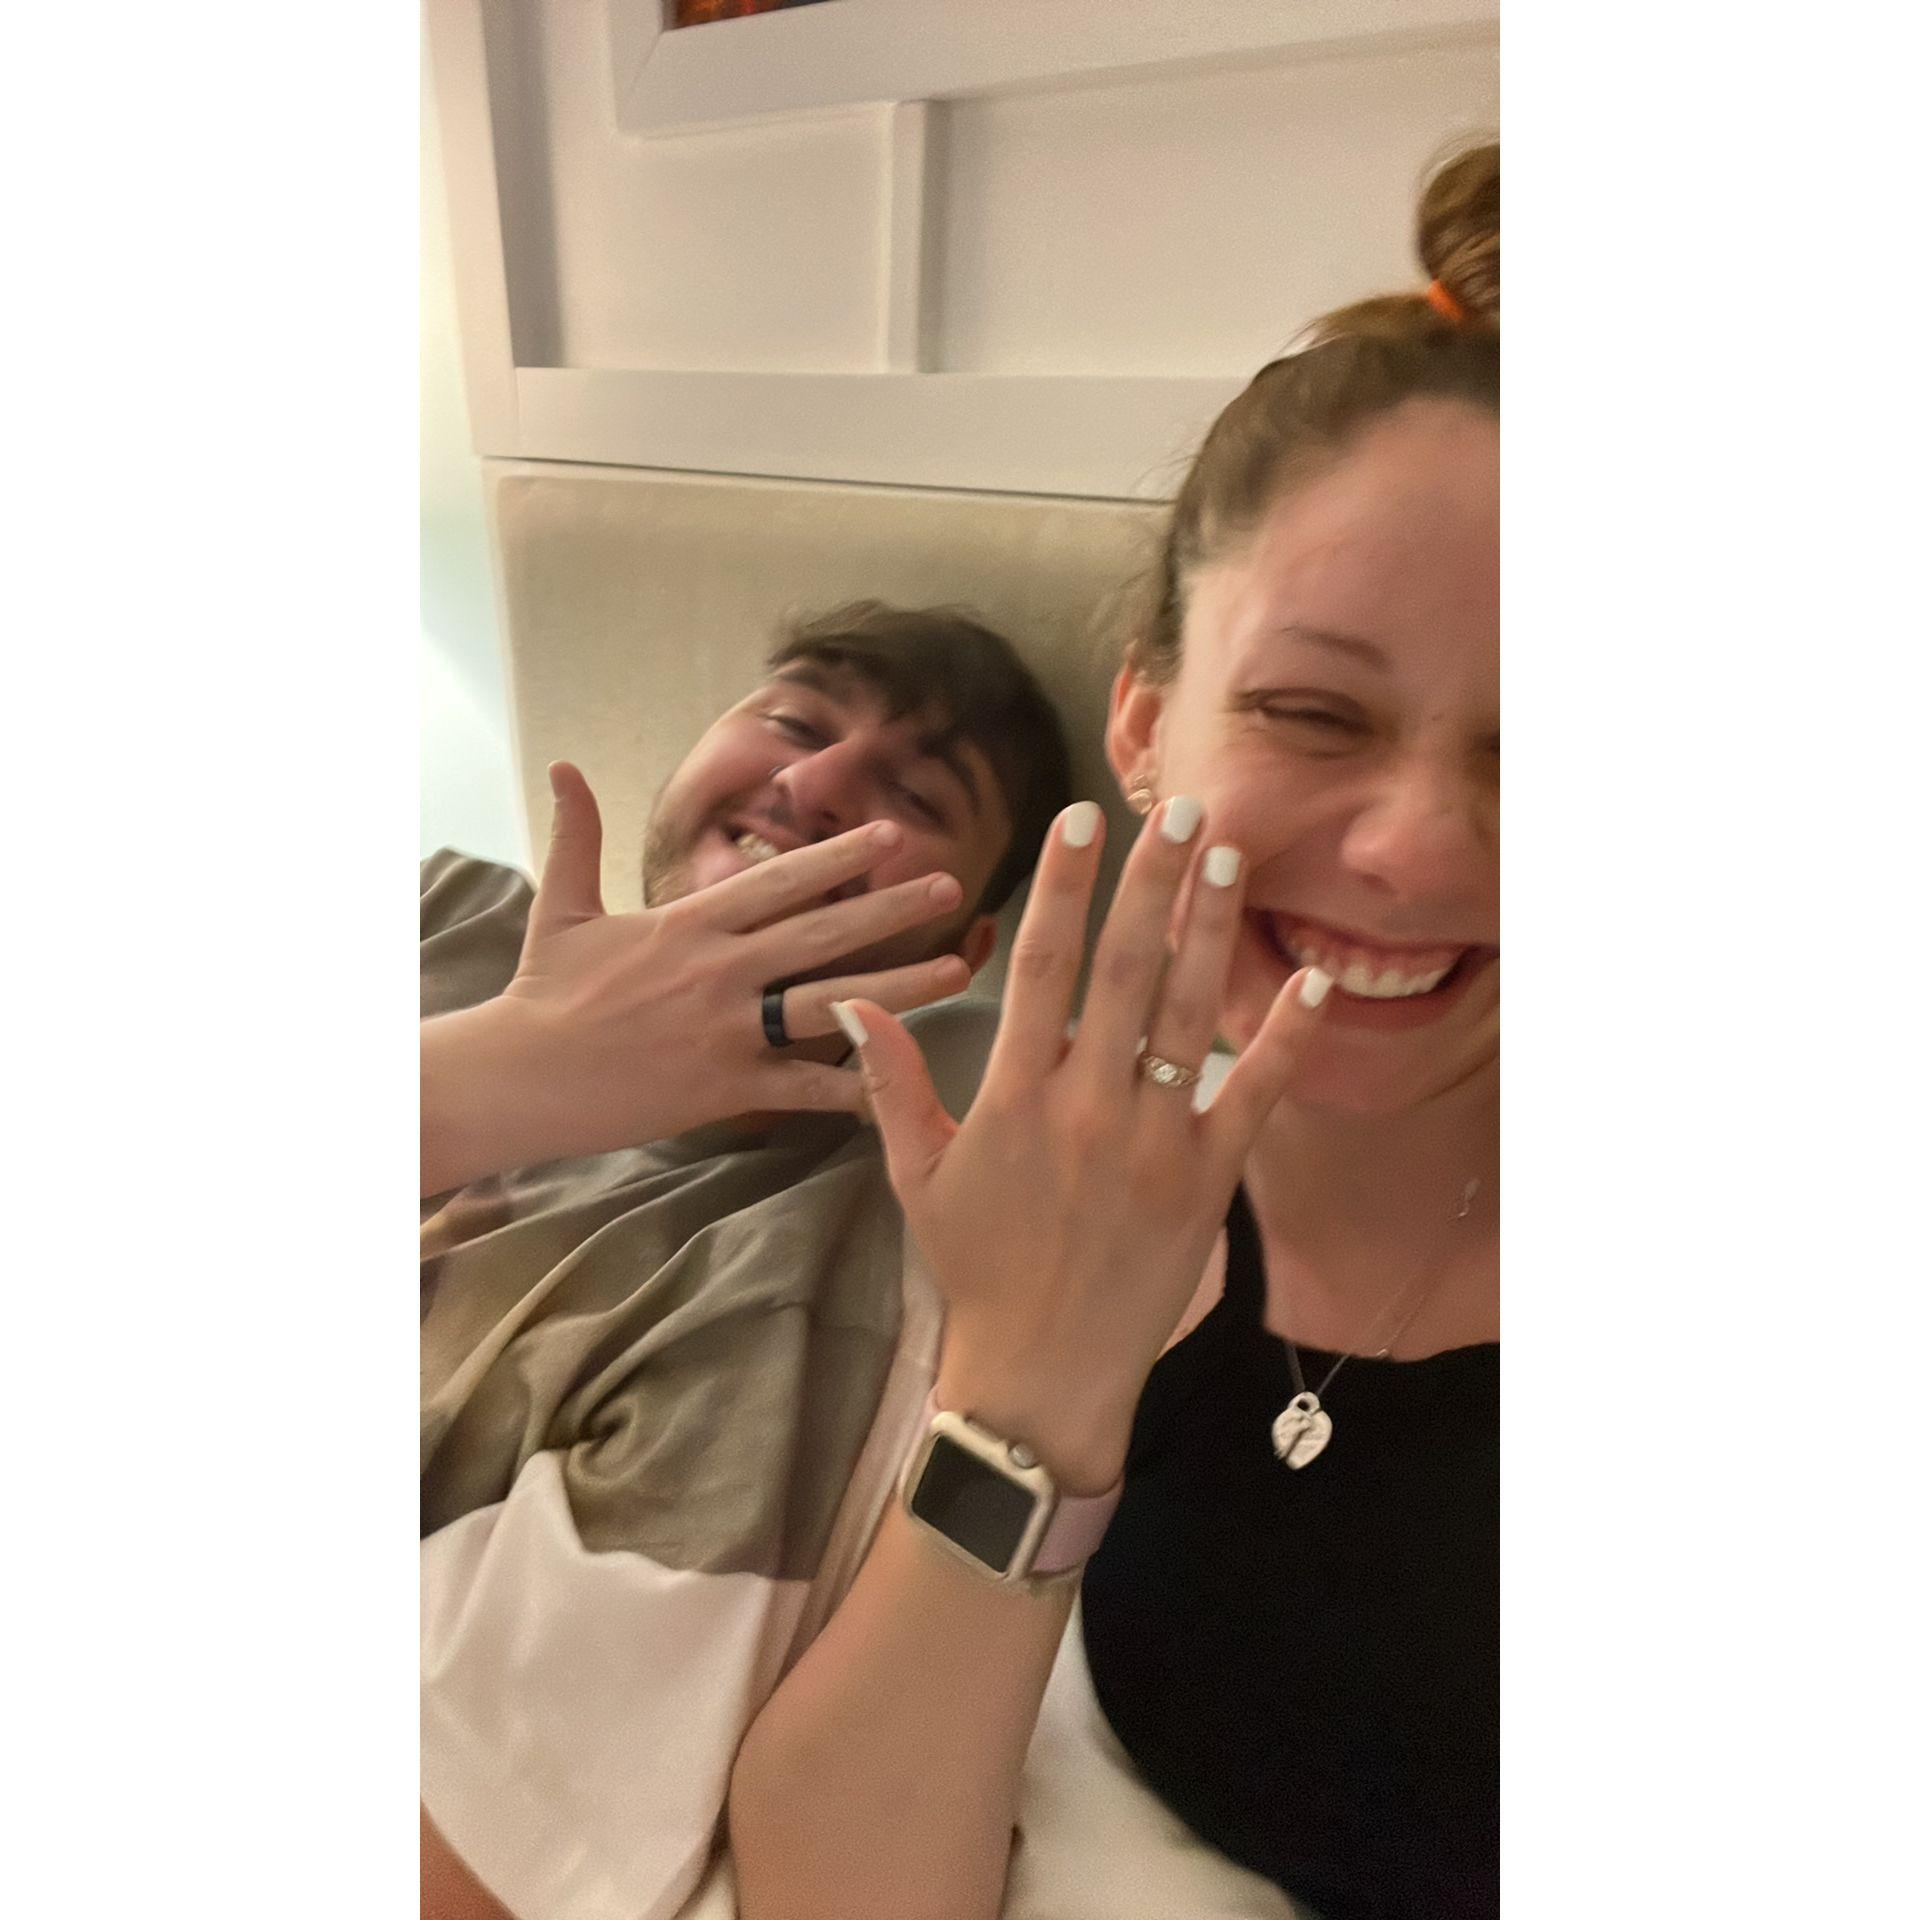 This was the night we got engaged and I was too excited not to take a picture of us with our rings.